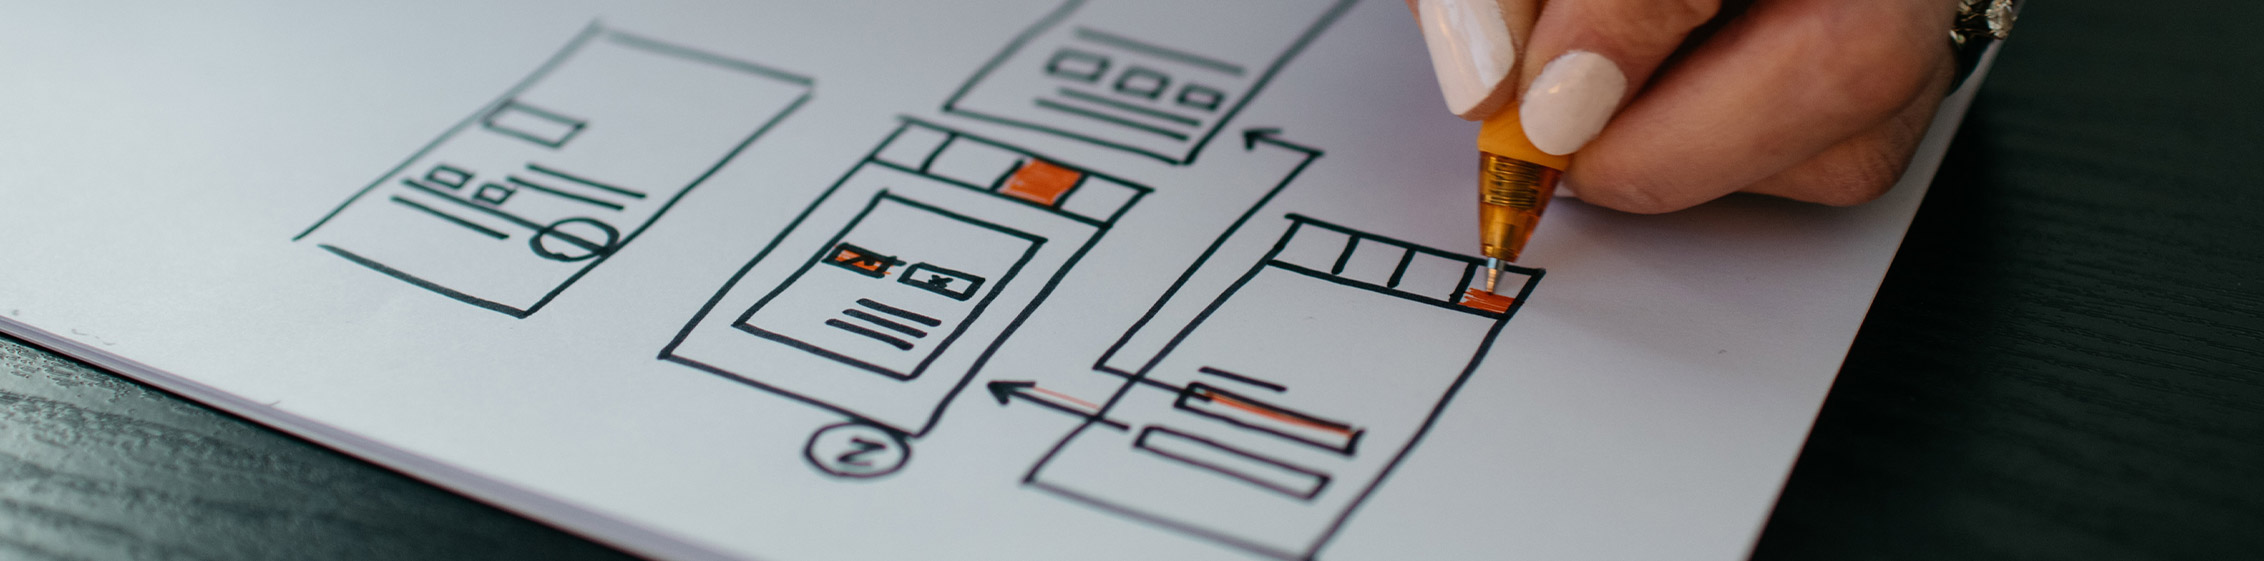 Top UI and UX Design Skills for 2022 and Beyond